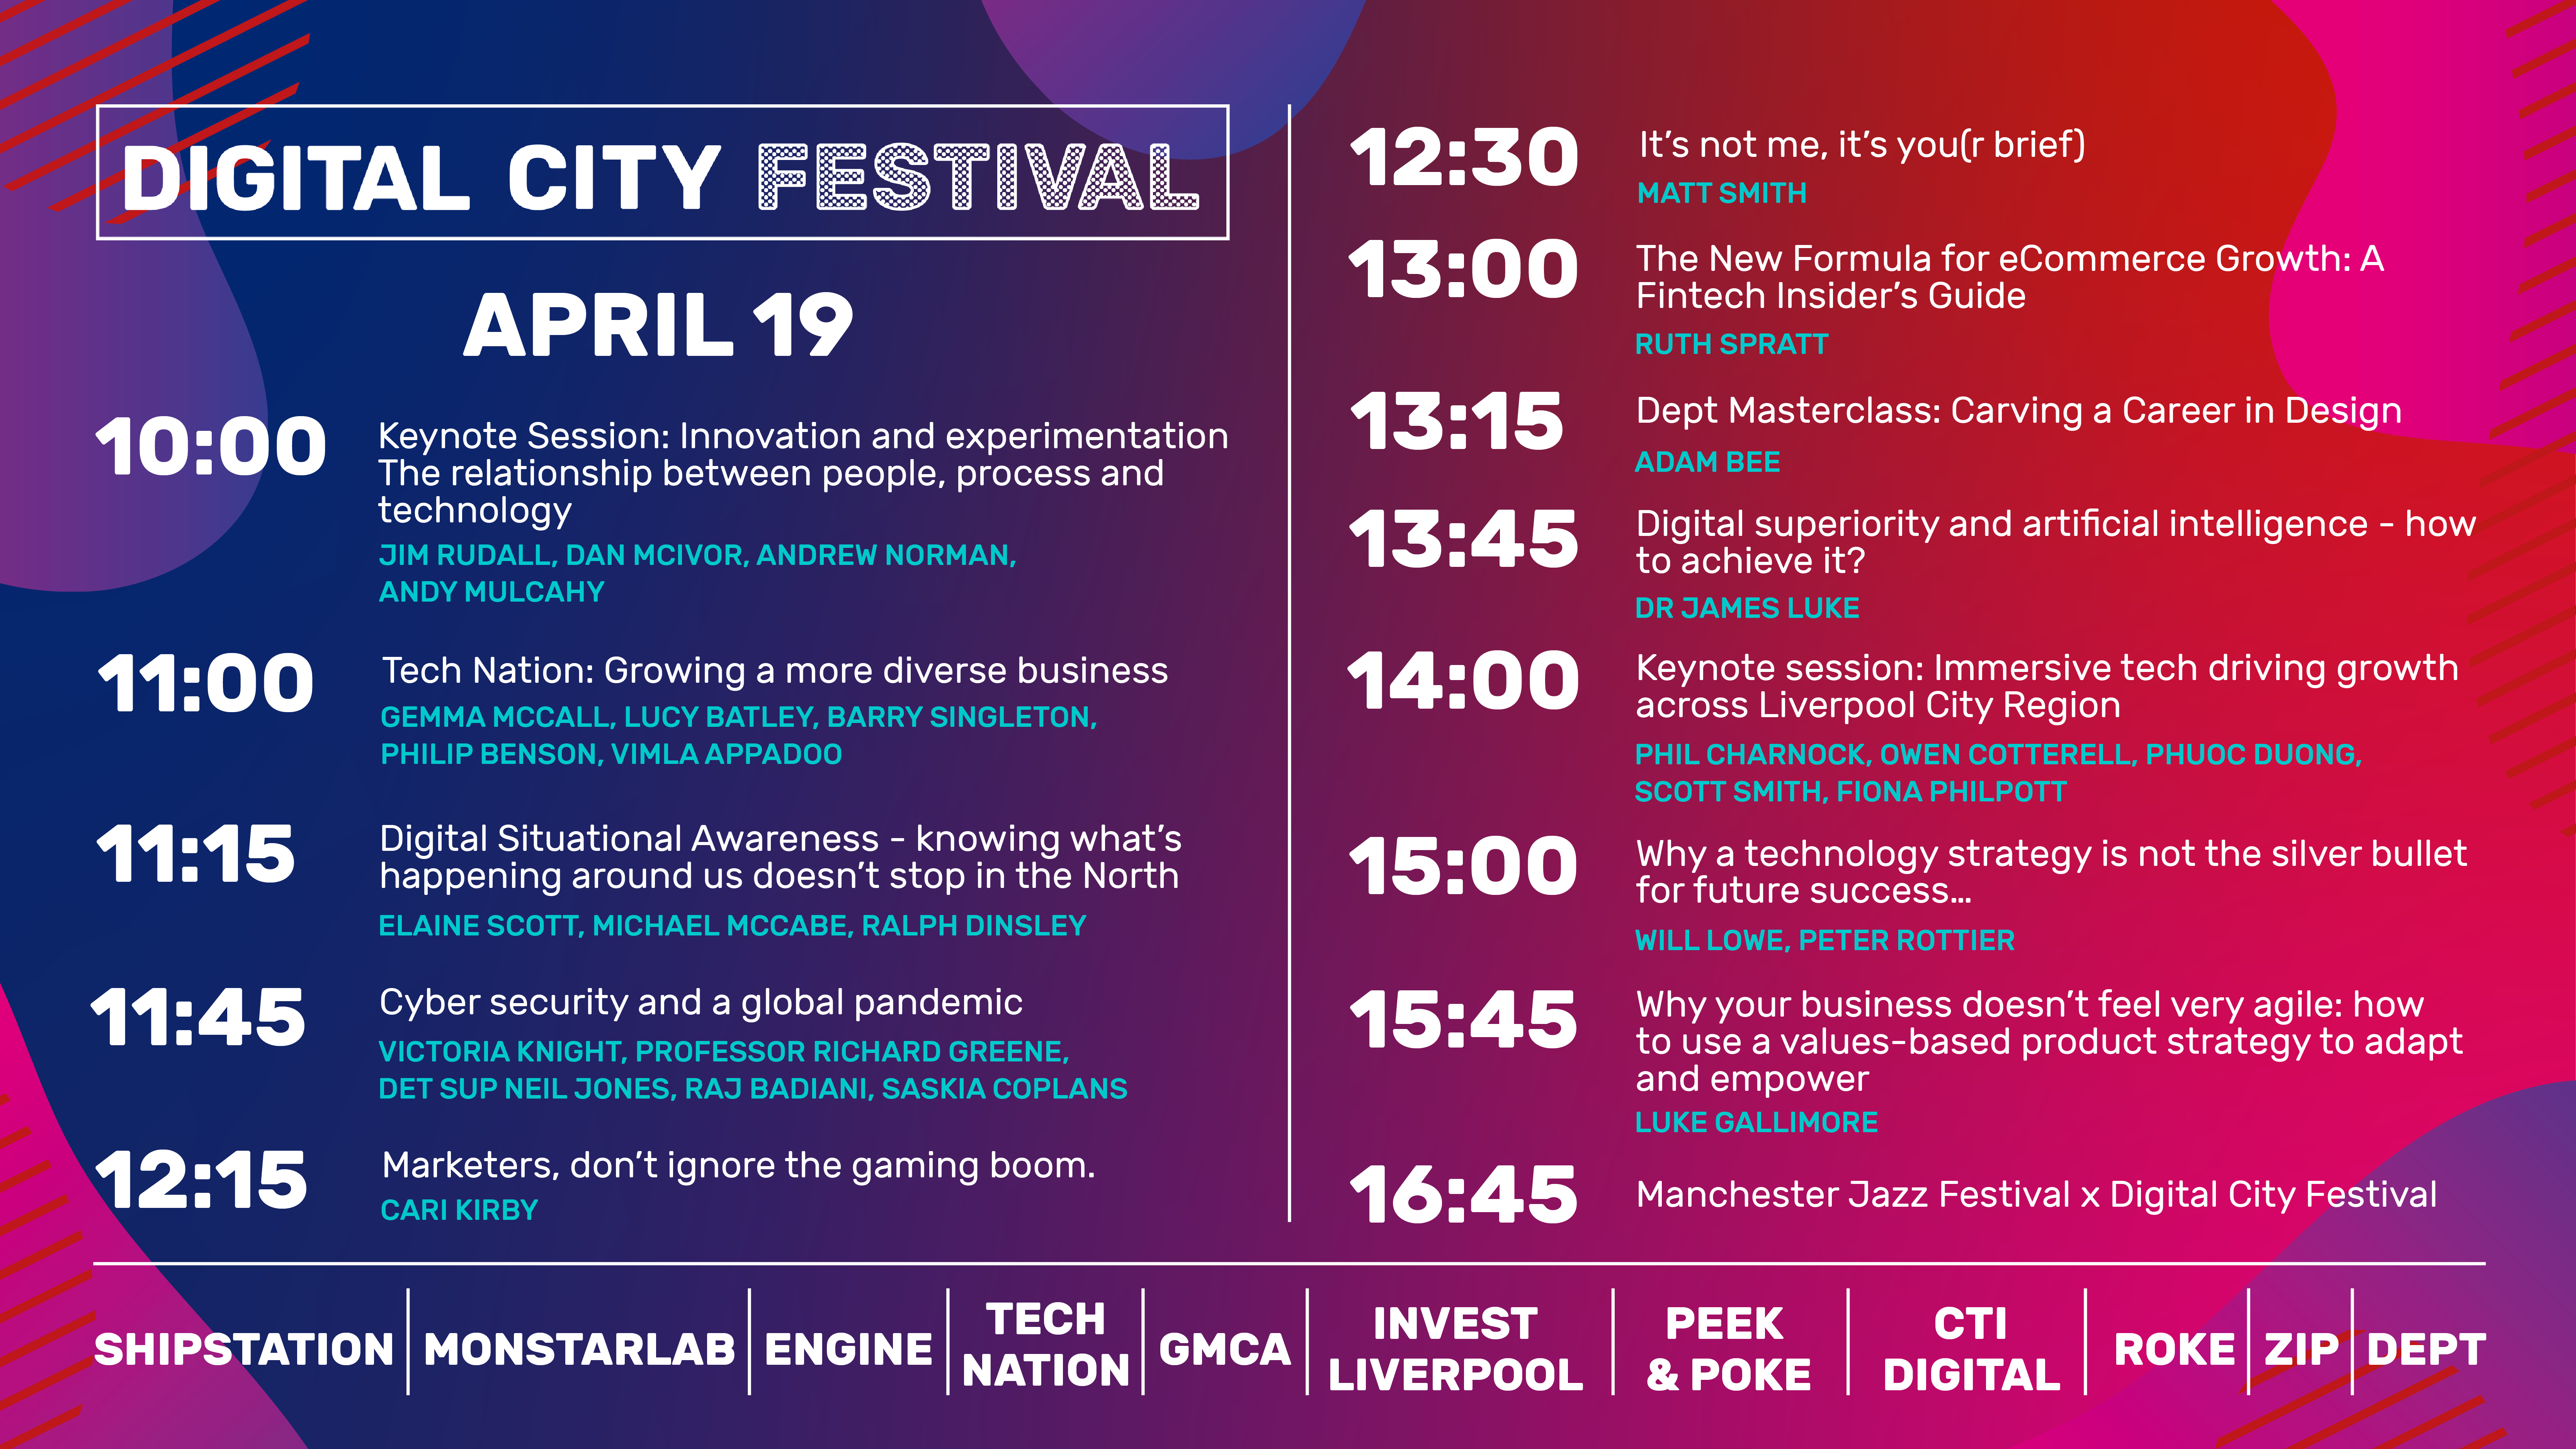 MONDAY 19: Digital City Festival returns for week 2 featuring names from Shopify, UKBlackTech and BAE Systems